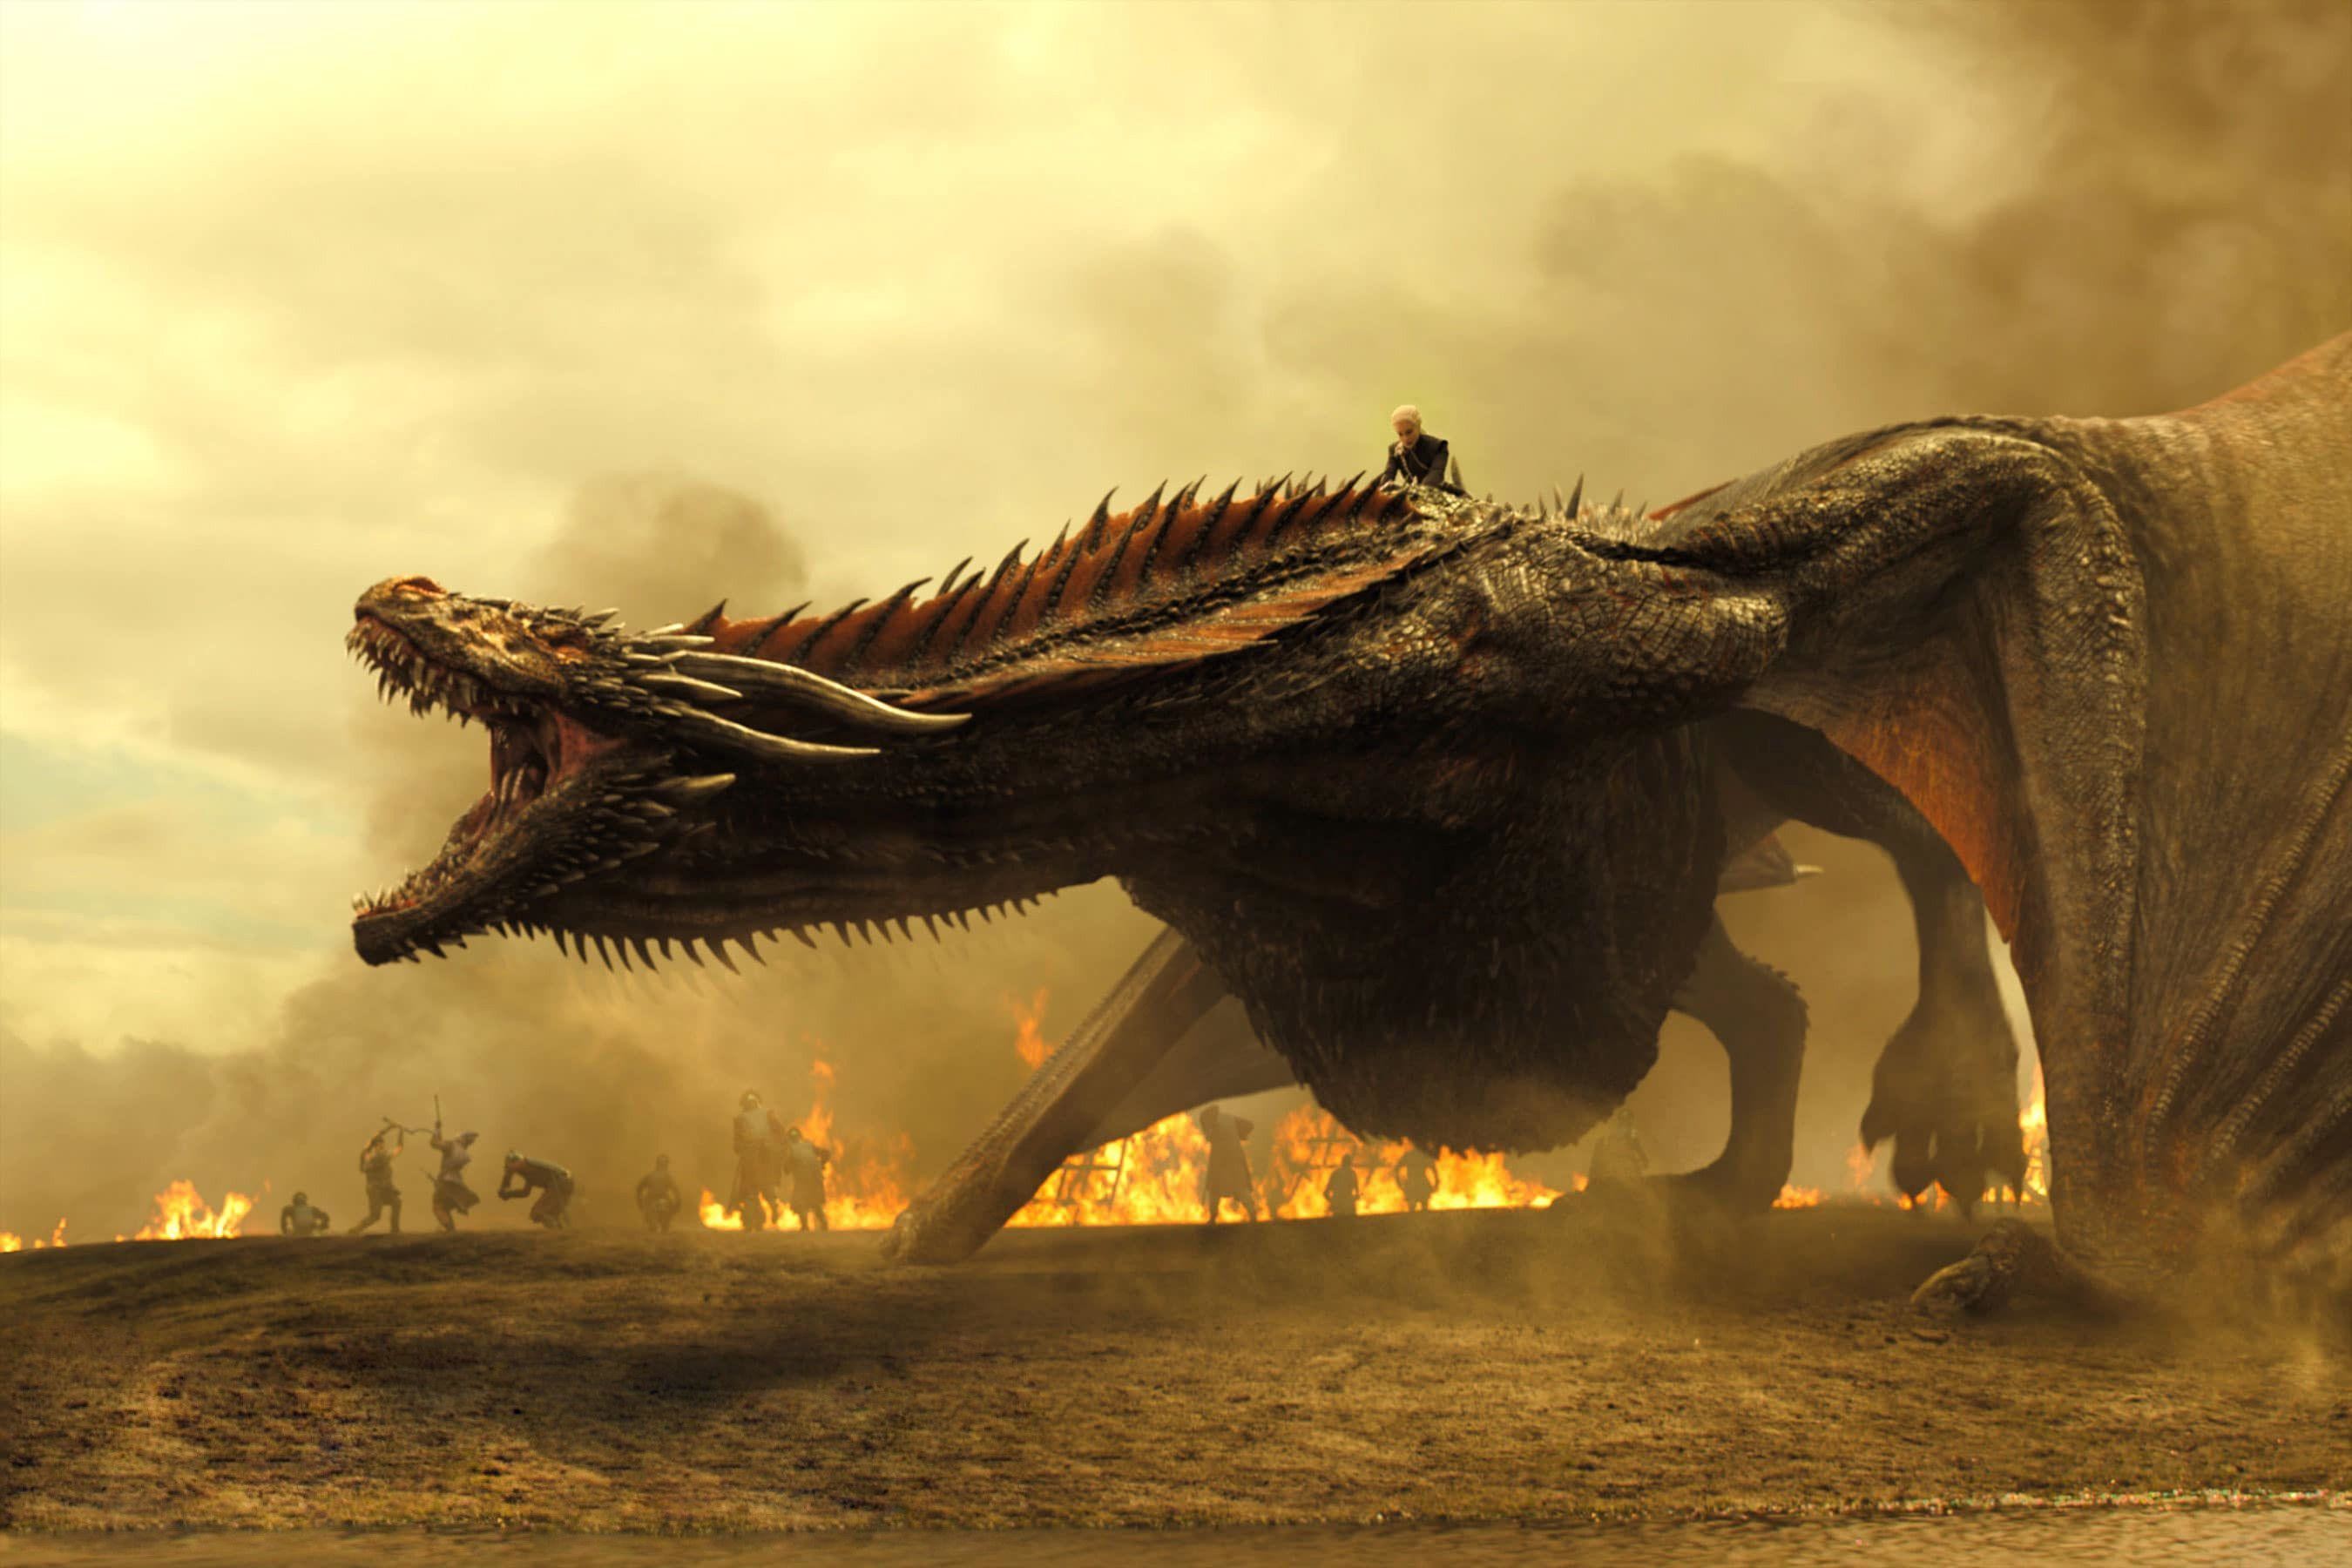 Game of Thrones Dragon Wallpaper (82+ images)